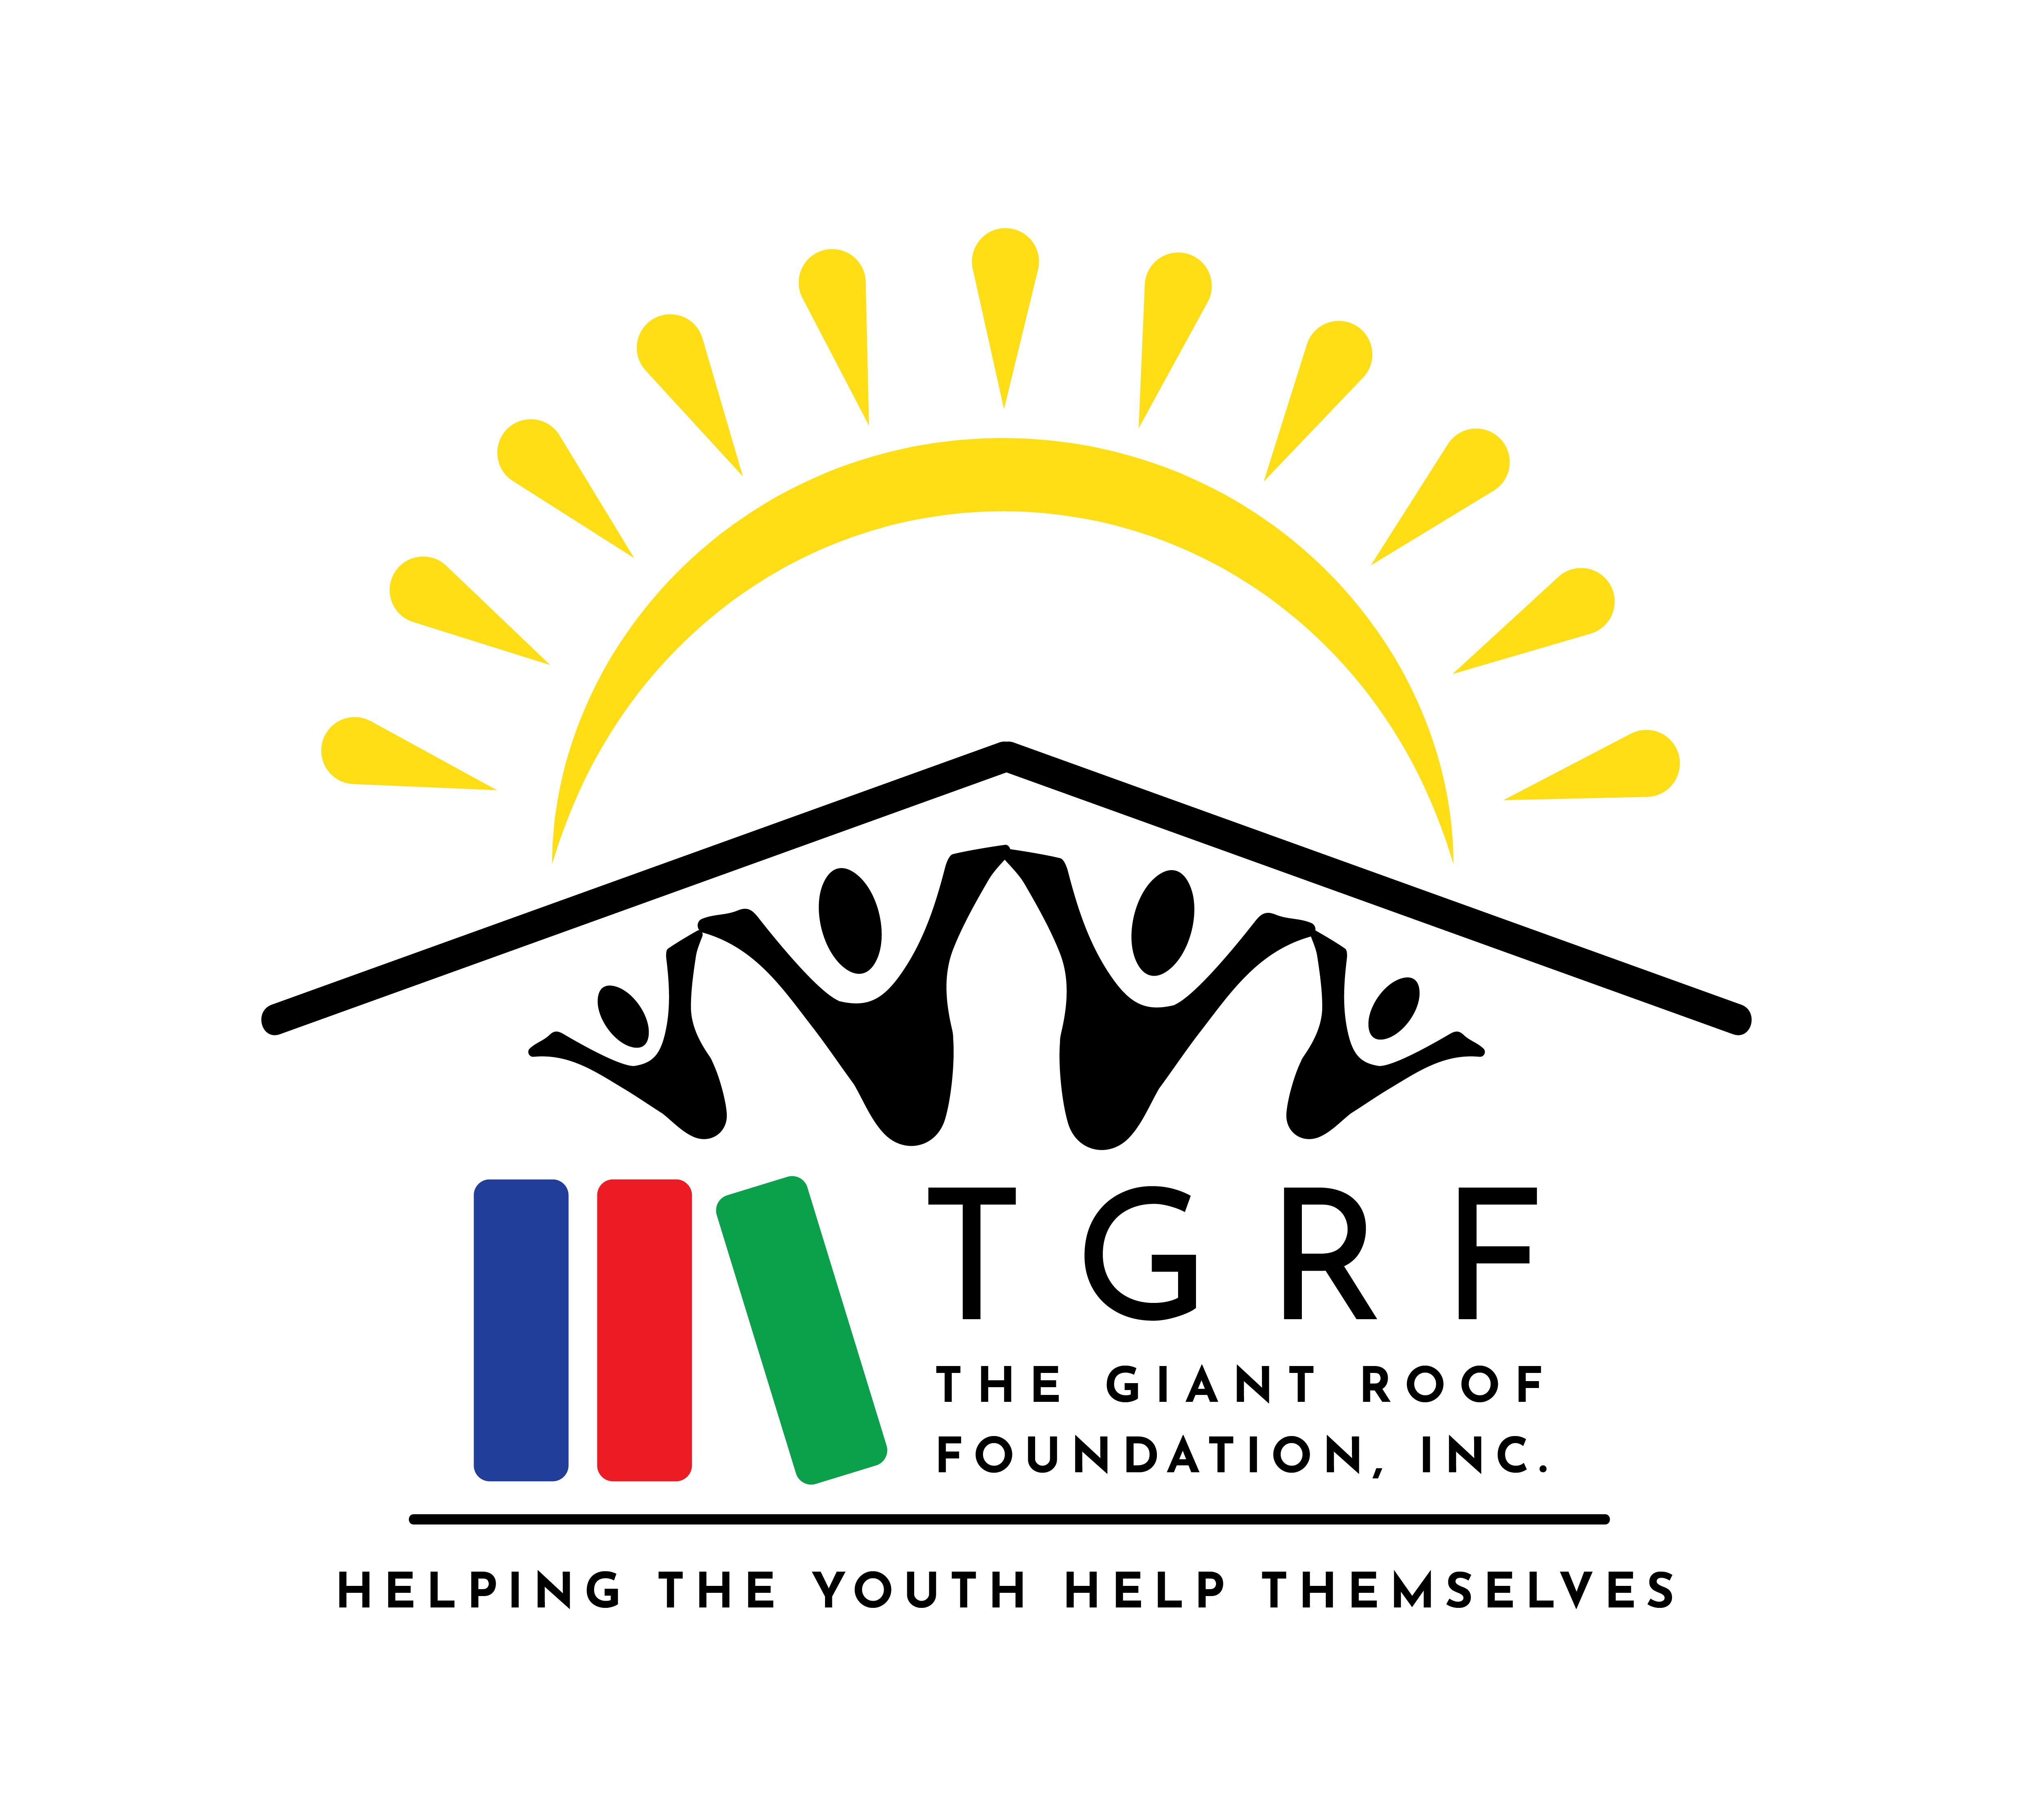 The Giant Roof Foundation